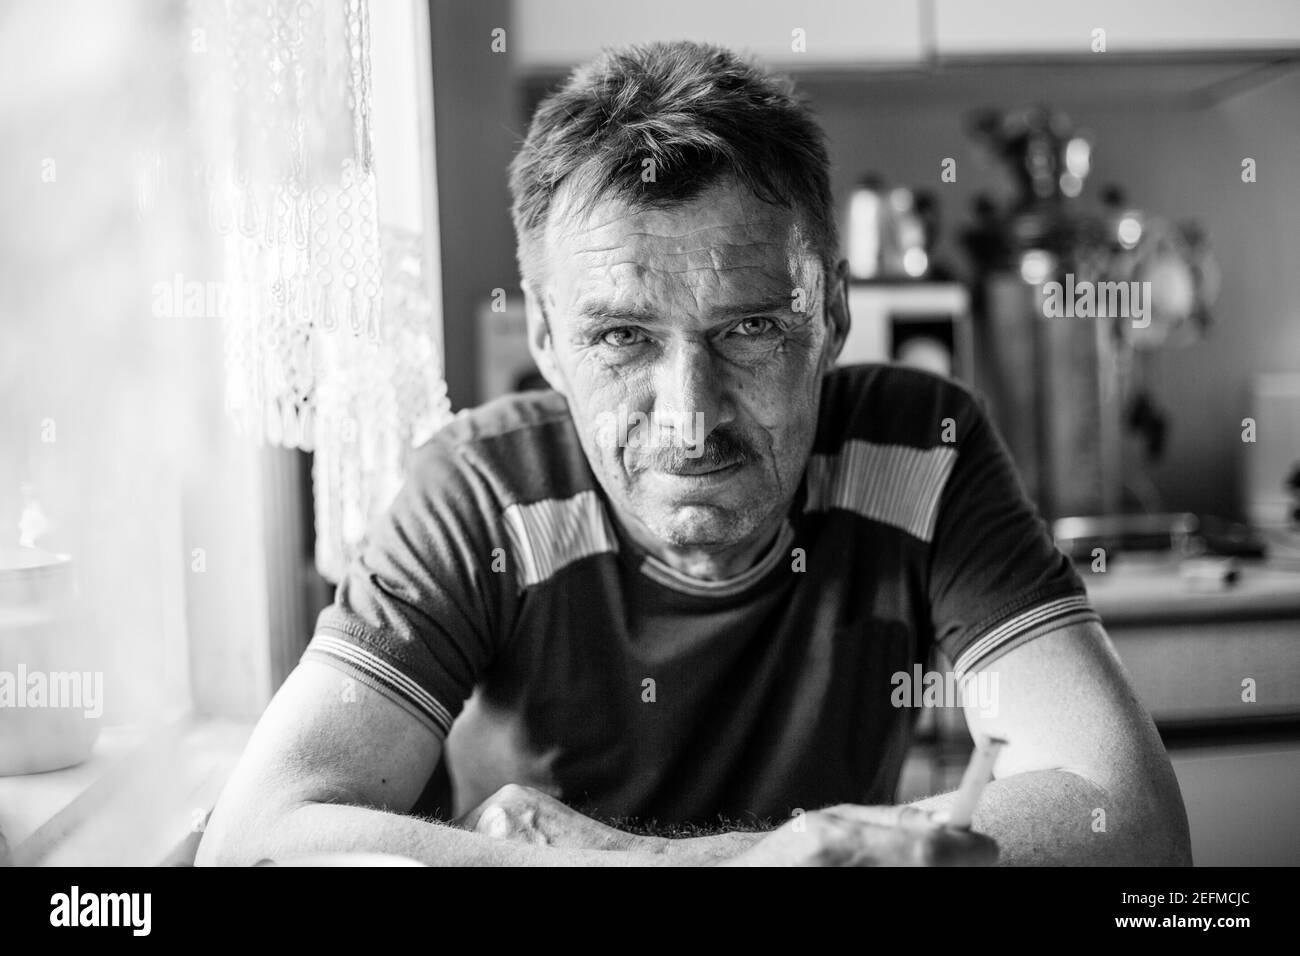 Portrait of a man farmer in his rural home. Black and white photo. Stock Photo